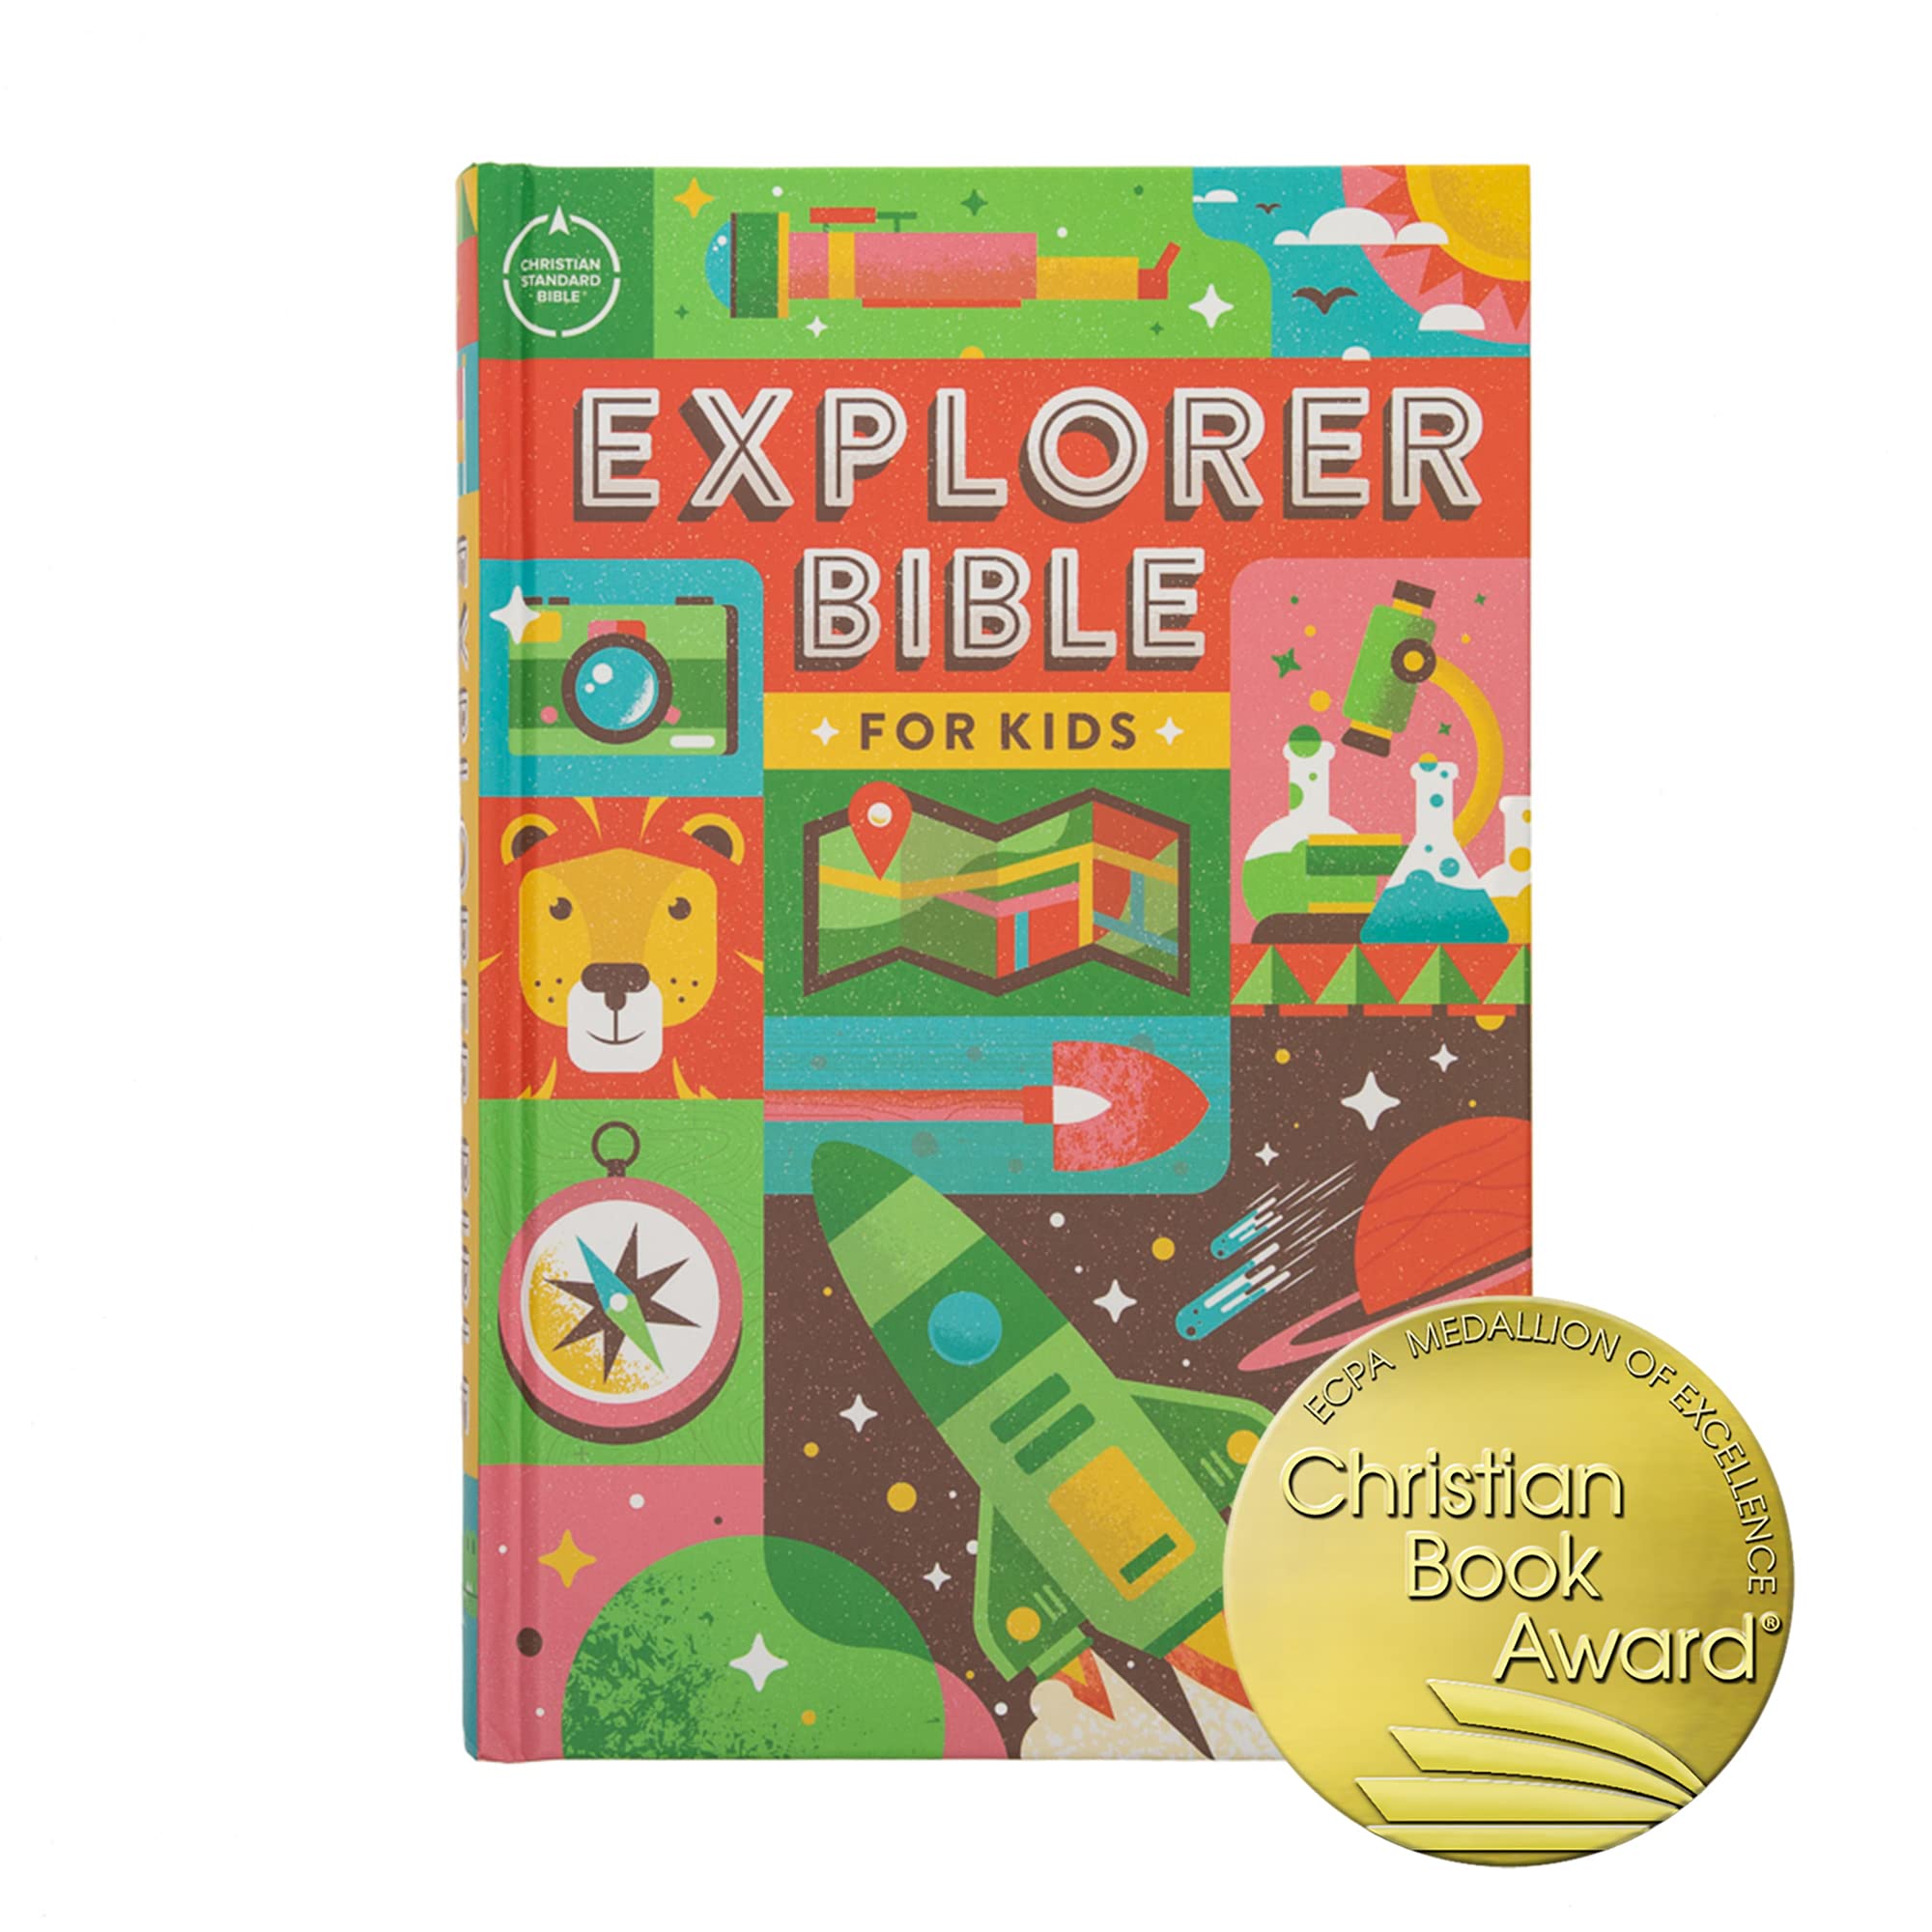 CSB Explorer Bible for Kids, Hardcover, Red Letter, Full-Color Design, Photos, Illustrations, Charts, Videos, Activities, Easy-to-Read Bible Serif Type